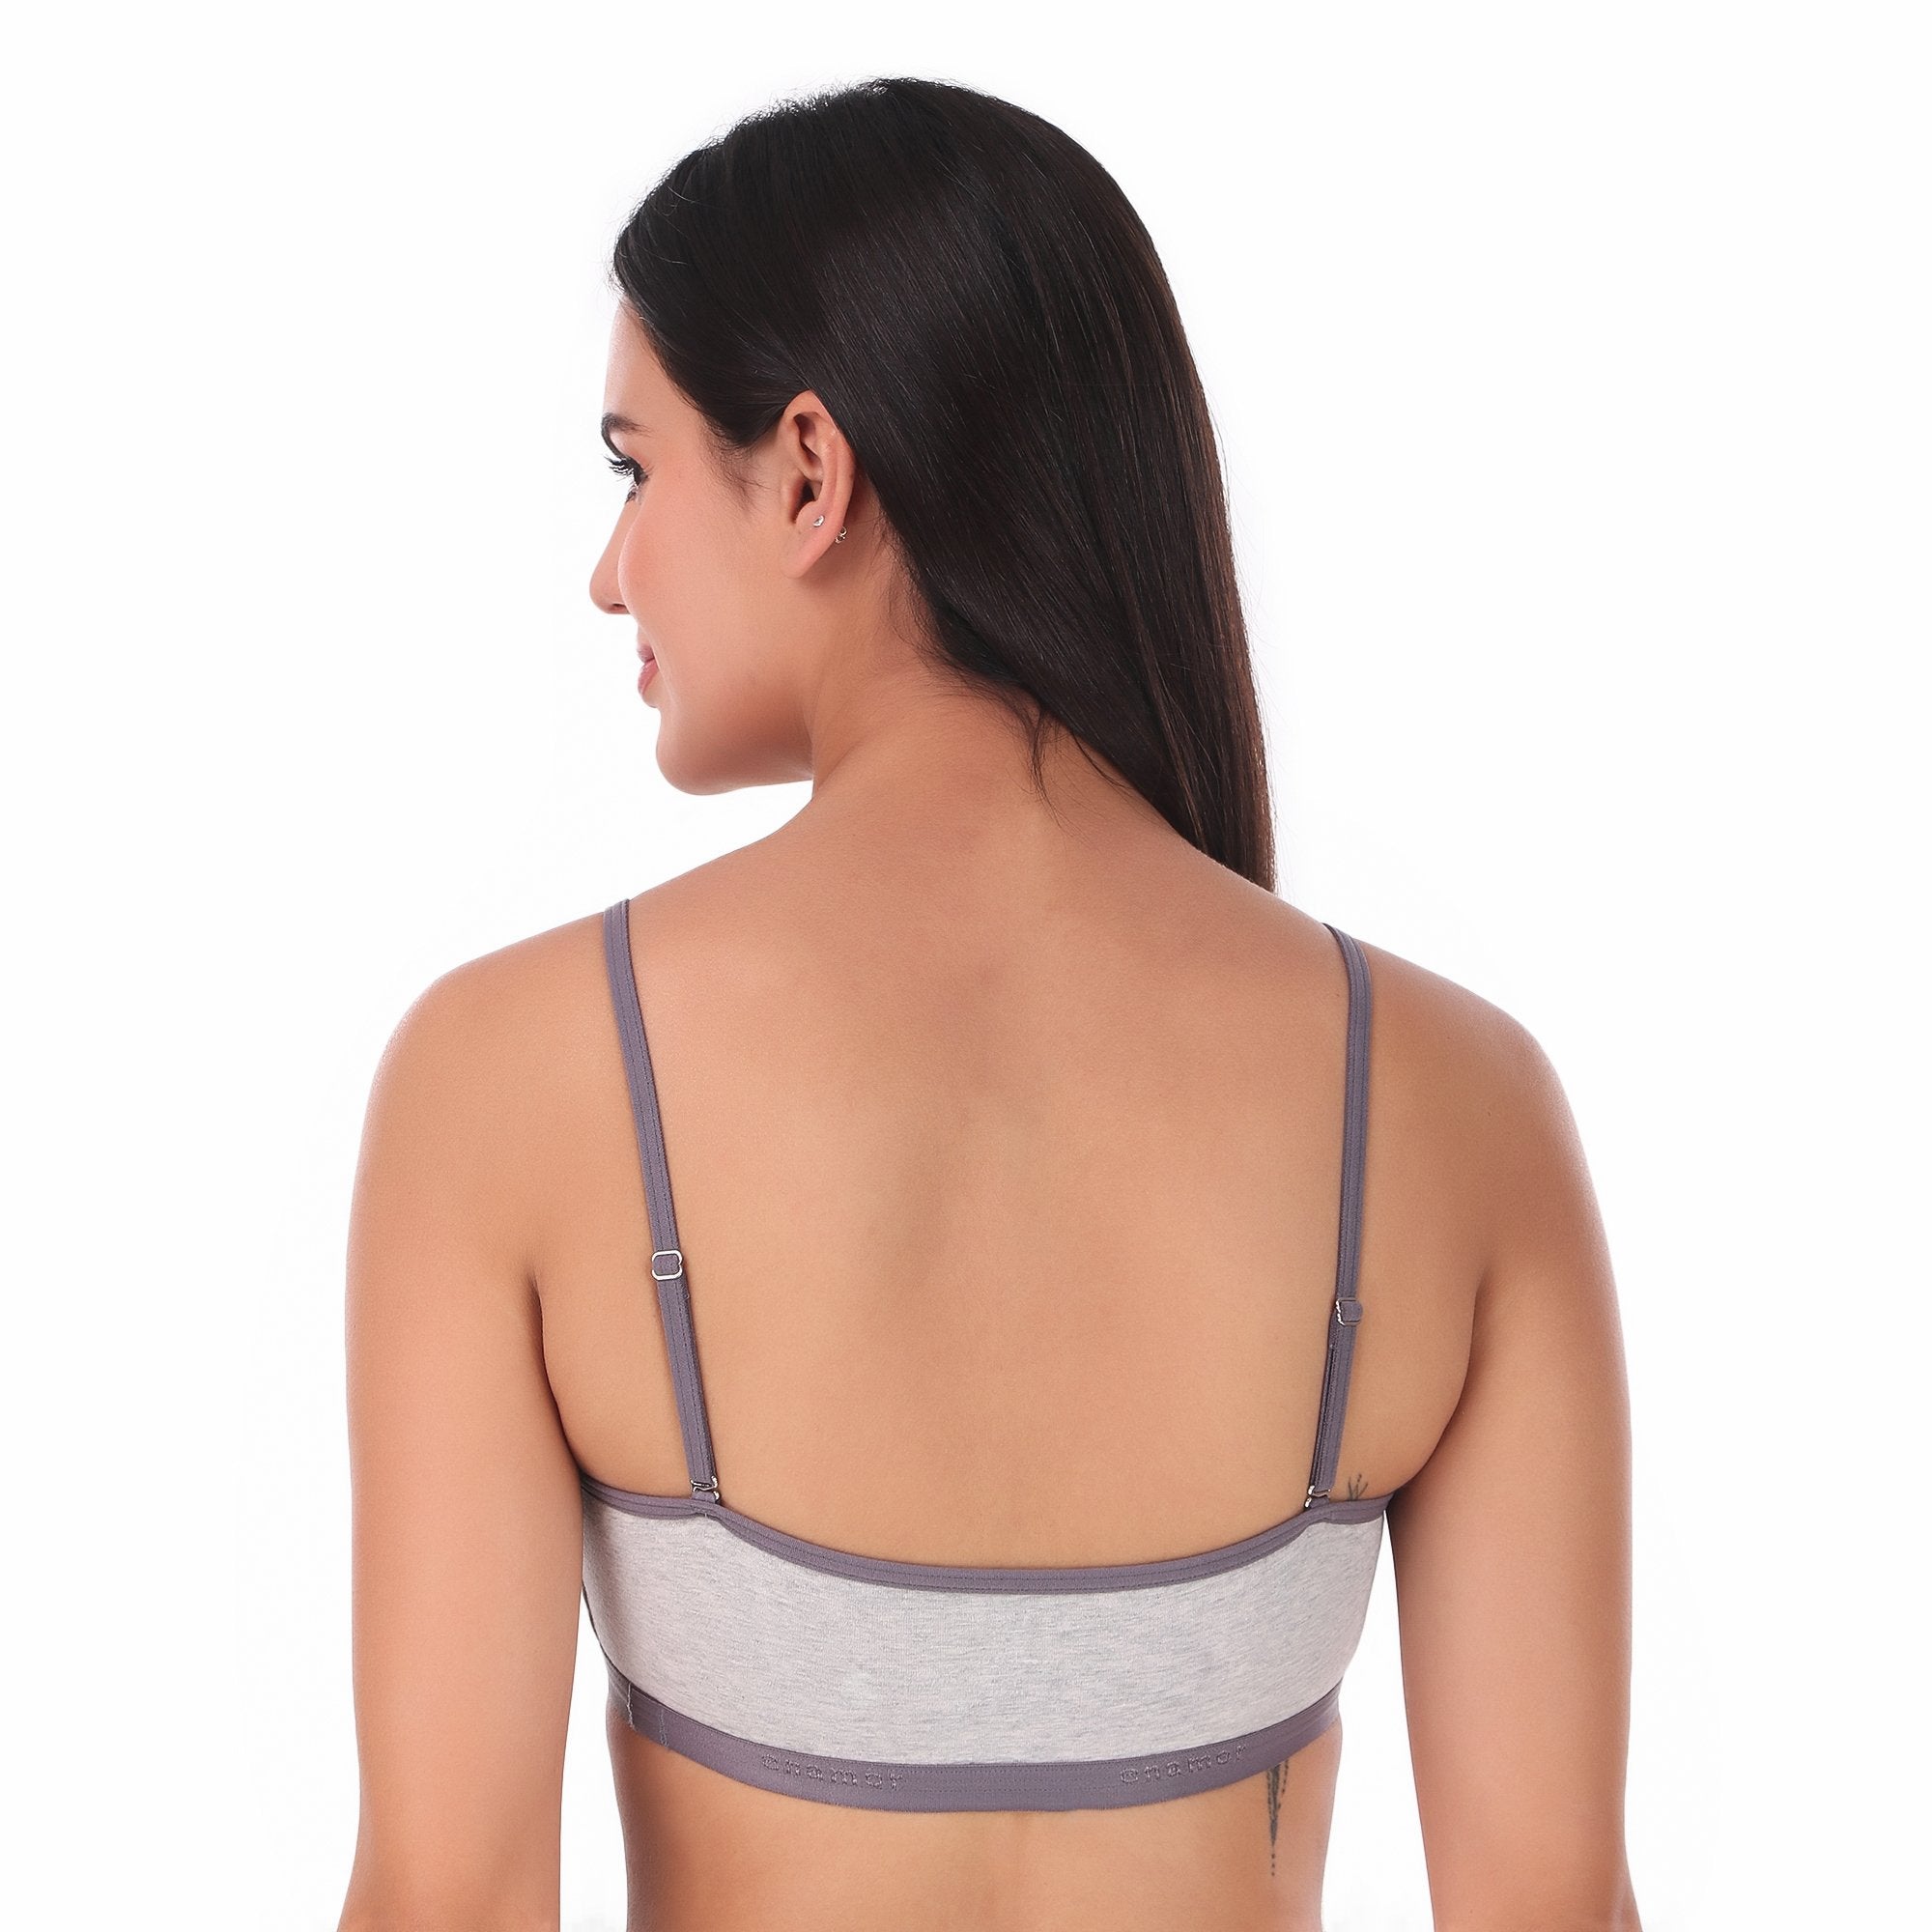 ENAMOR-BB03 TRENDY FIT STRETCH COTTON BEGINNERS BRA WITH ANTIMICROBIAL FINISH